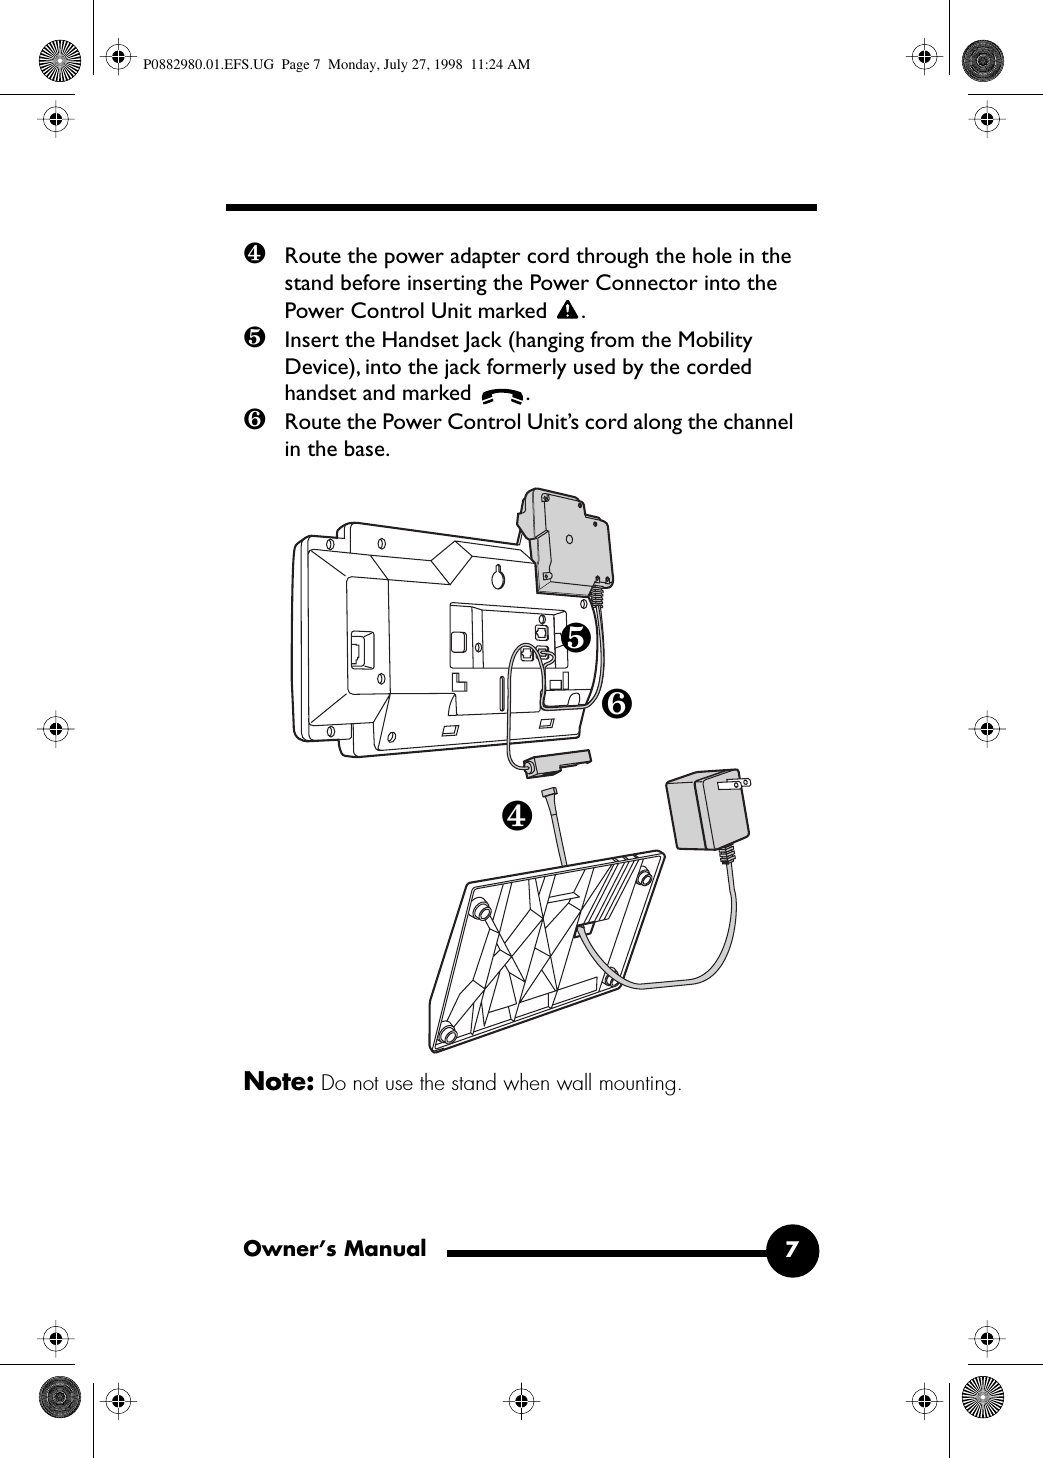  Owner’s Manual 7 ❹ Route the power adapter cord through the hole in the stand before inserting the Power Connector into the Power Control Unit marked  . ❺ Insert the Handset Jack (hanging from the Mobility Device), into the jack formerly used by the corded handset and marked  . ❻ Route the Power Control Unit’s cord along the channel in the base. Note:  Do not use the stand when wall mounting.❹❺❻ P0882980.01.EFS.UG  Page 7  Monday, July 27, 1998  11:24 AM